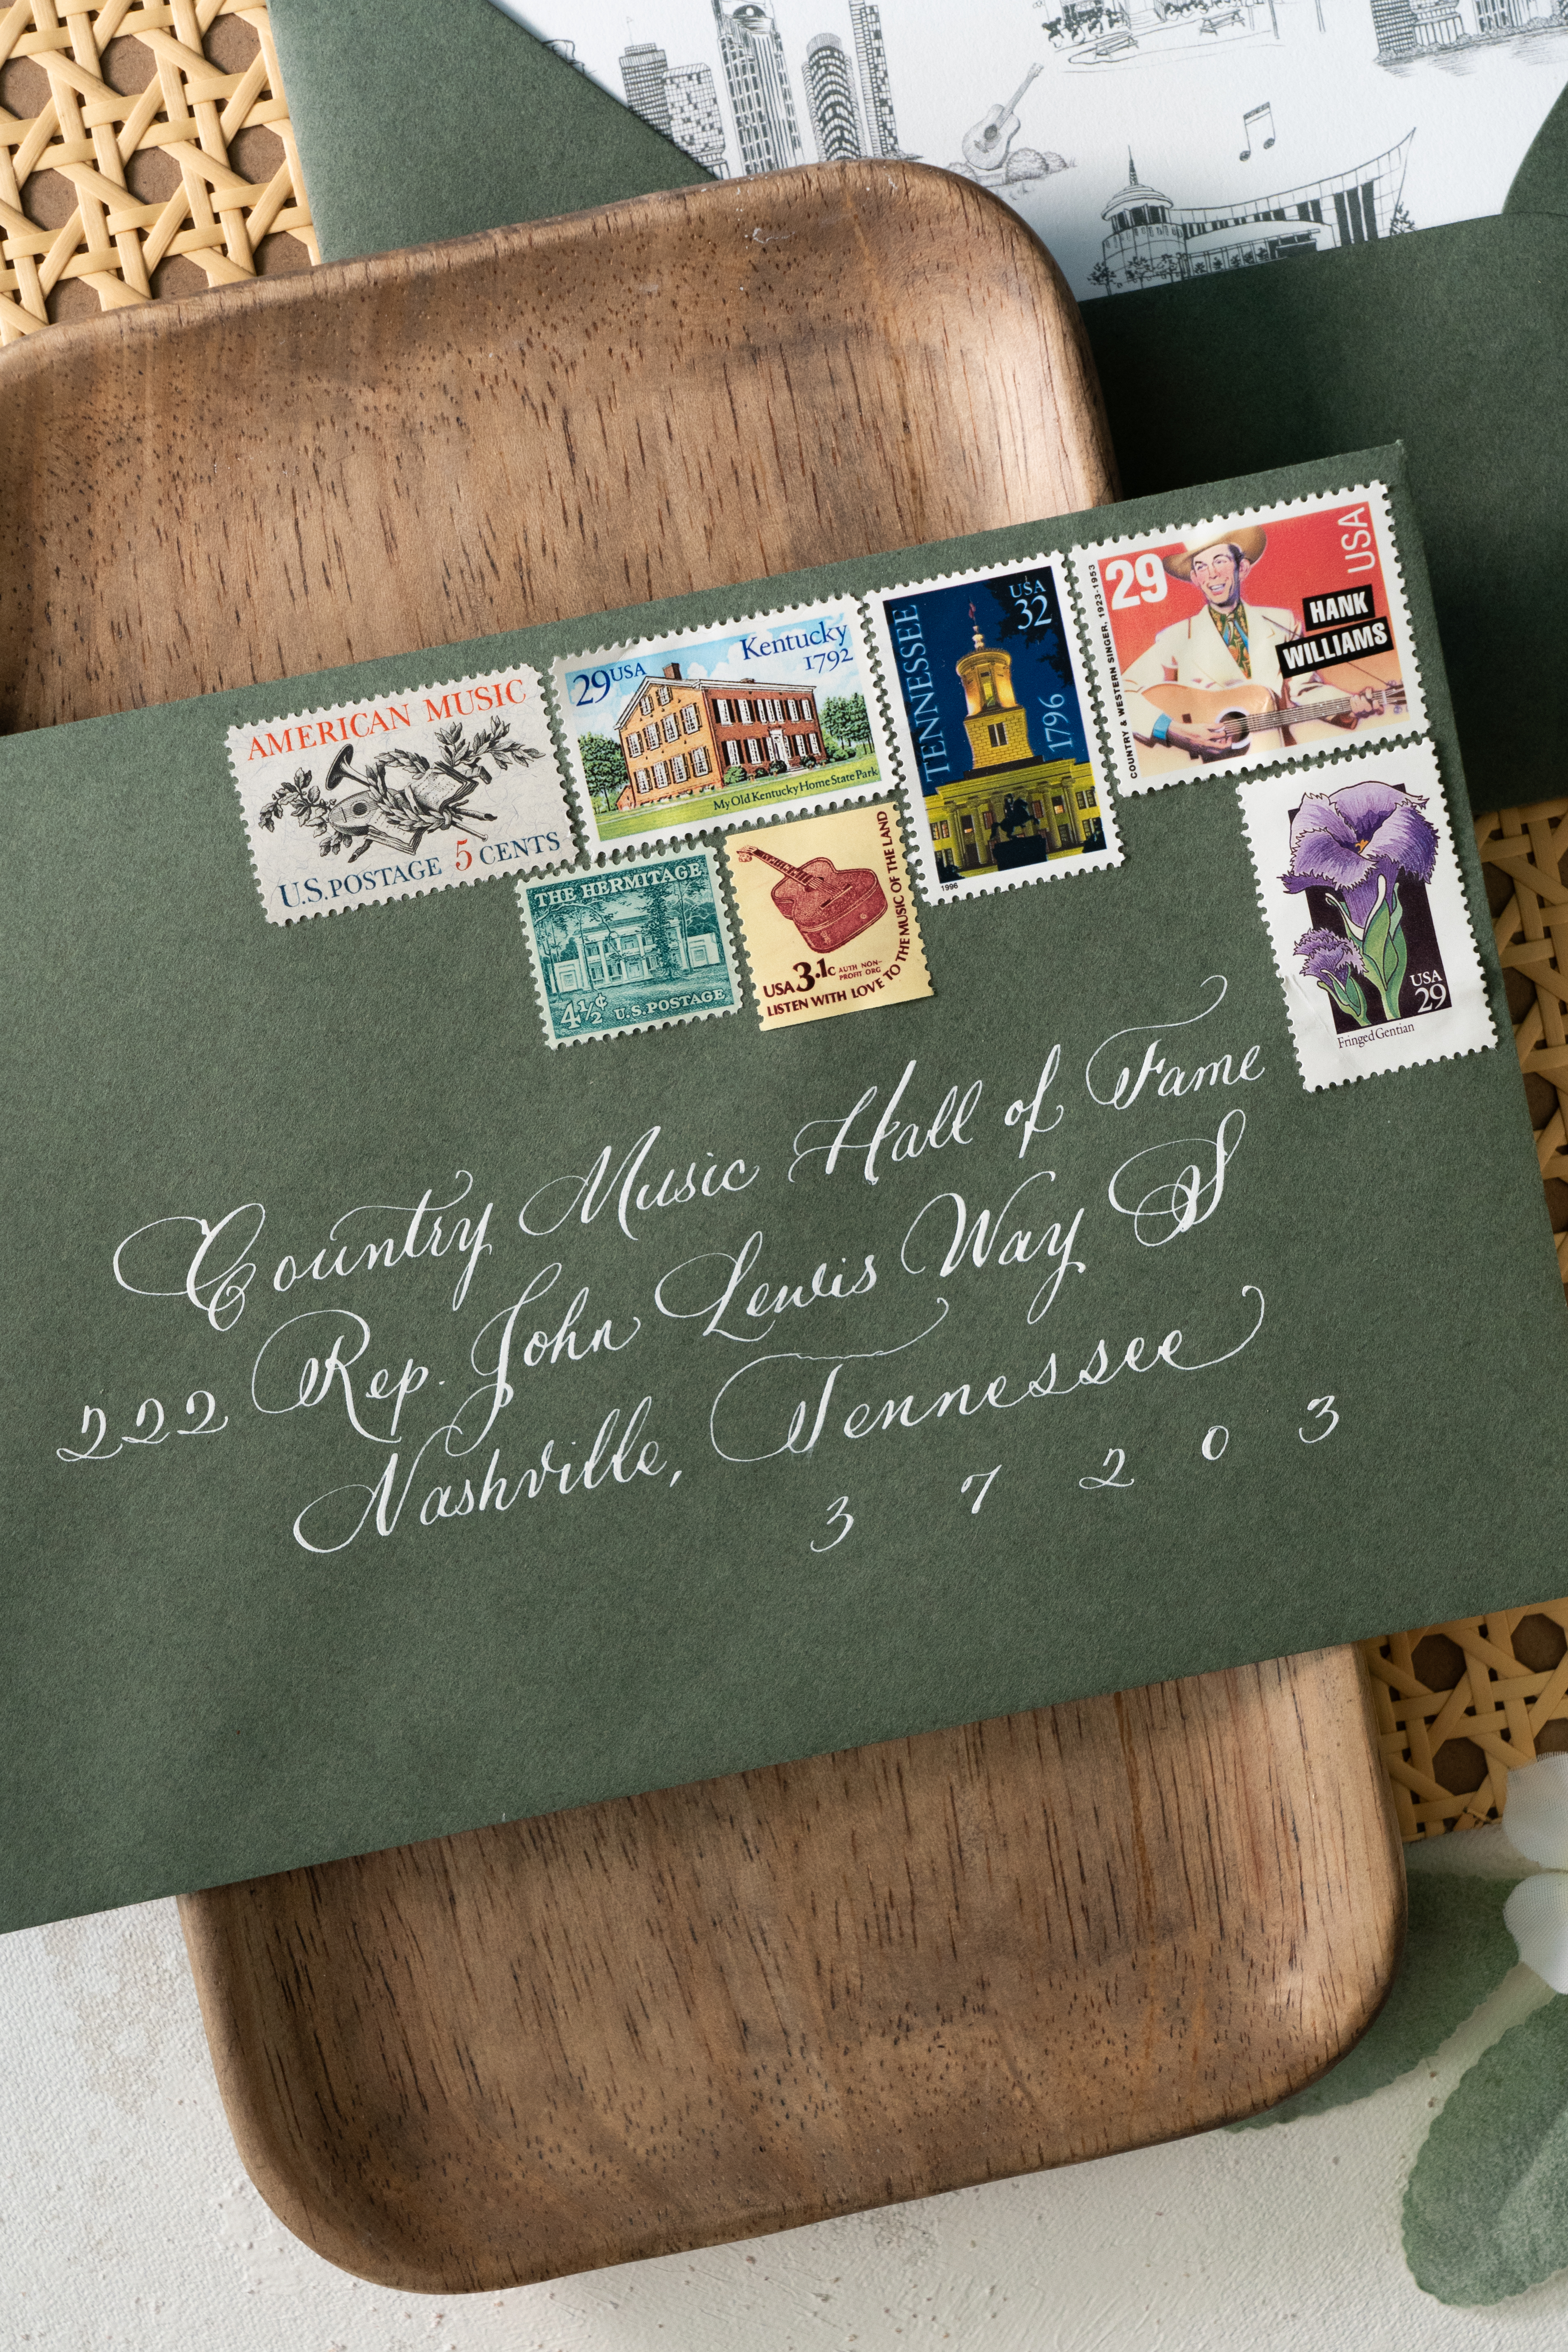 Custom calligraphed envelope with vintage postage and sitting on top of wooden tray.